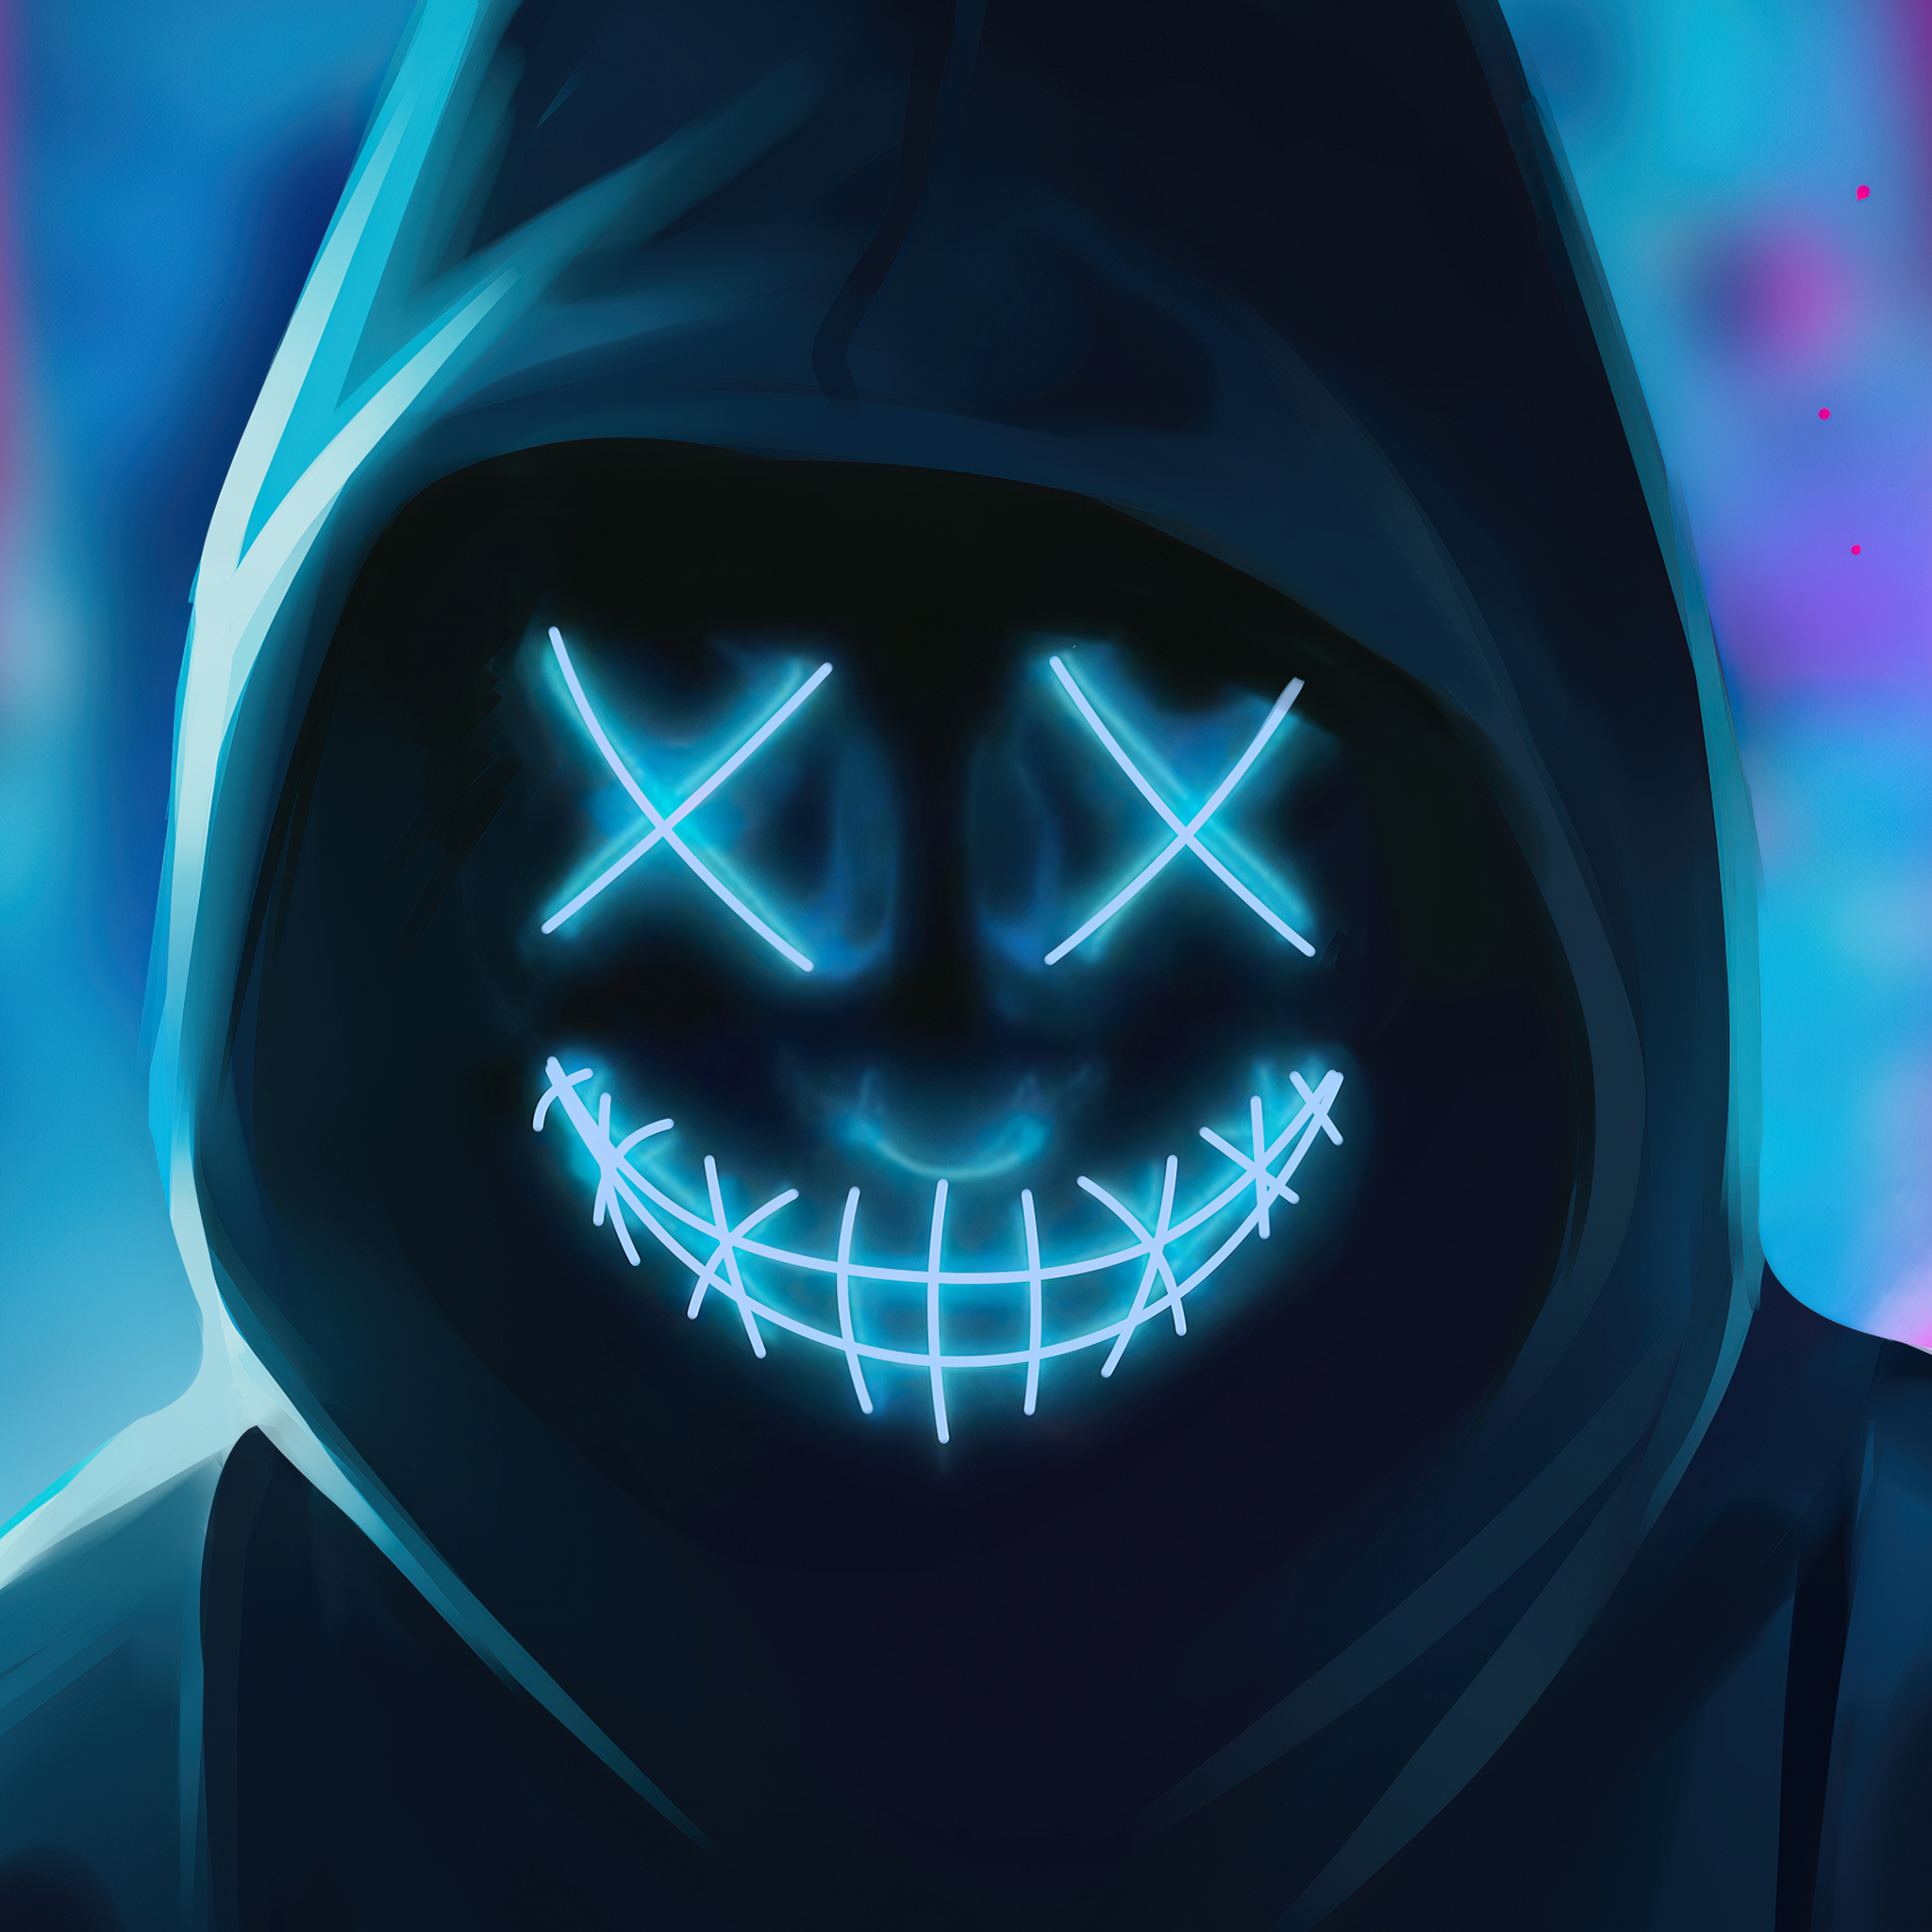 2048x2048 Neon Guy Mask Smiling 4k Ipad Air HD 4k Wallpapers, Images ...